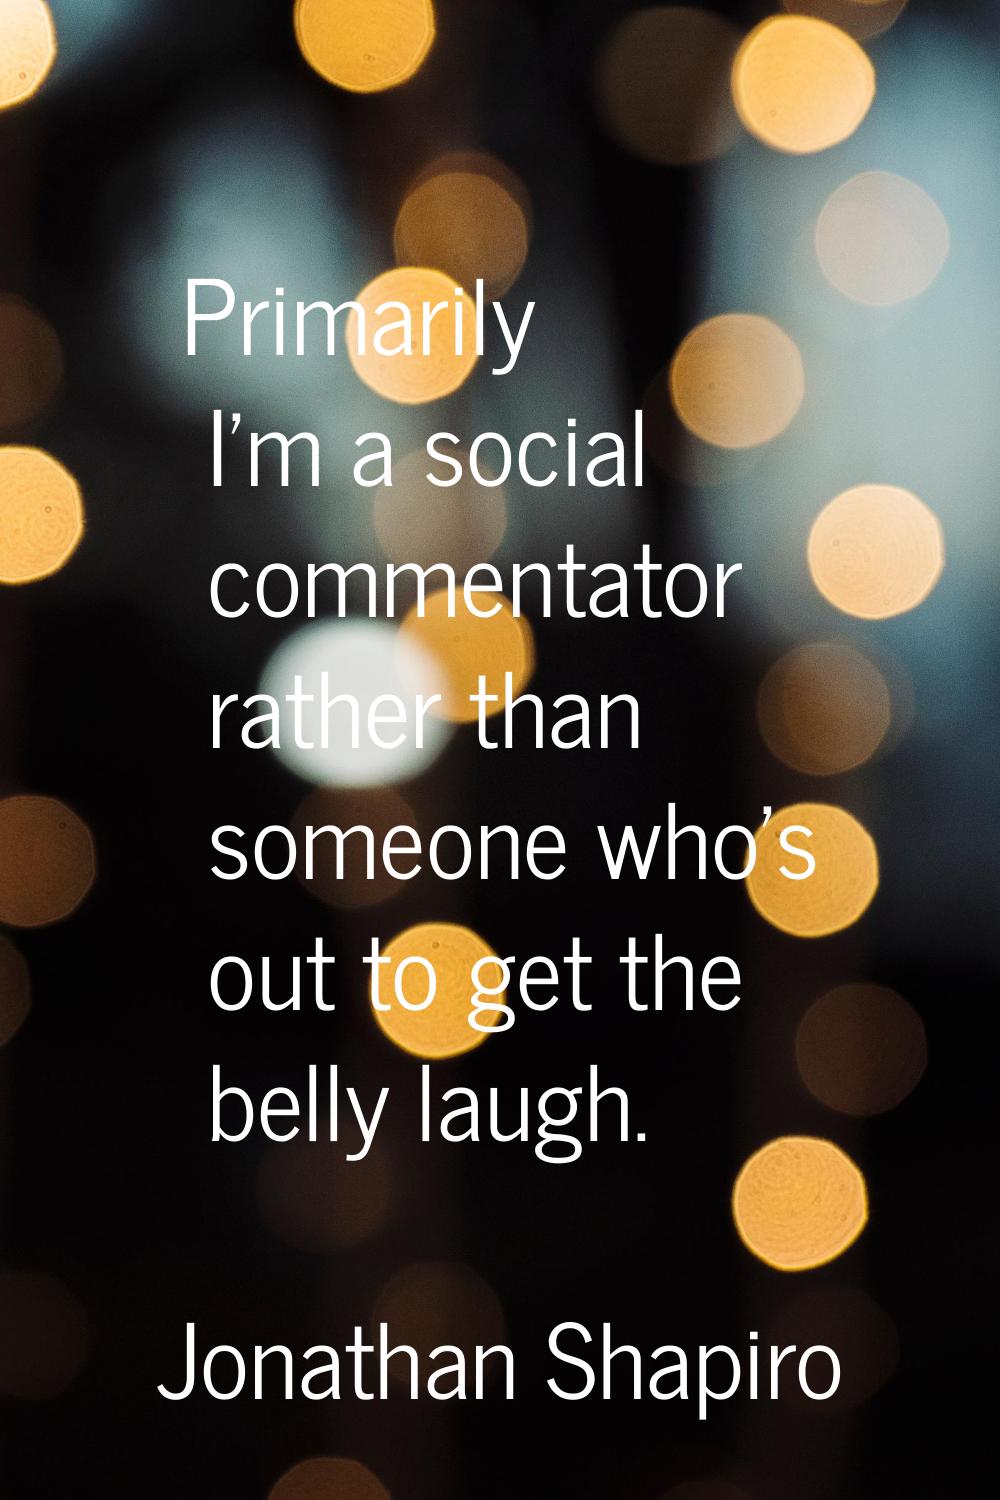 Primarily I'm a social commentator rather than someone who's out to get the belly laugh.